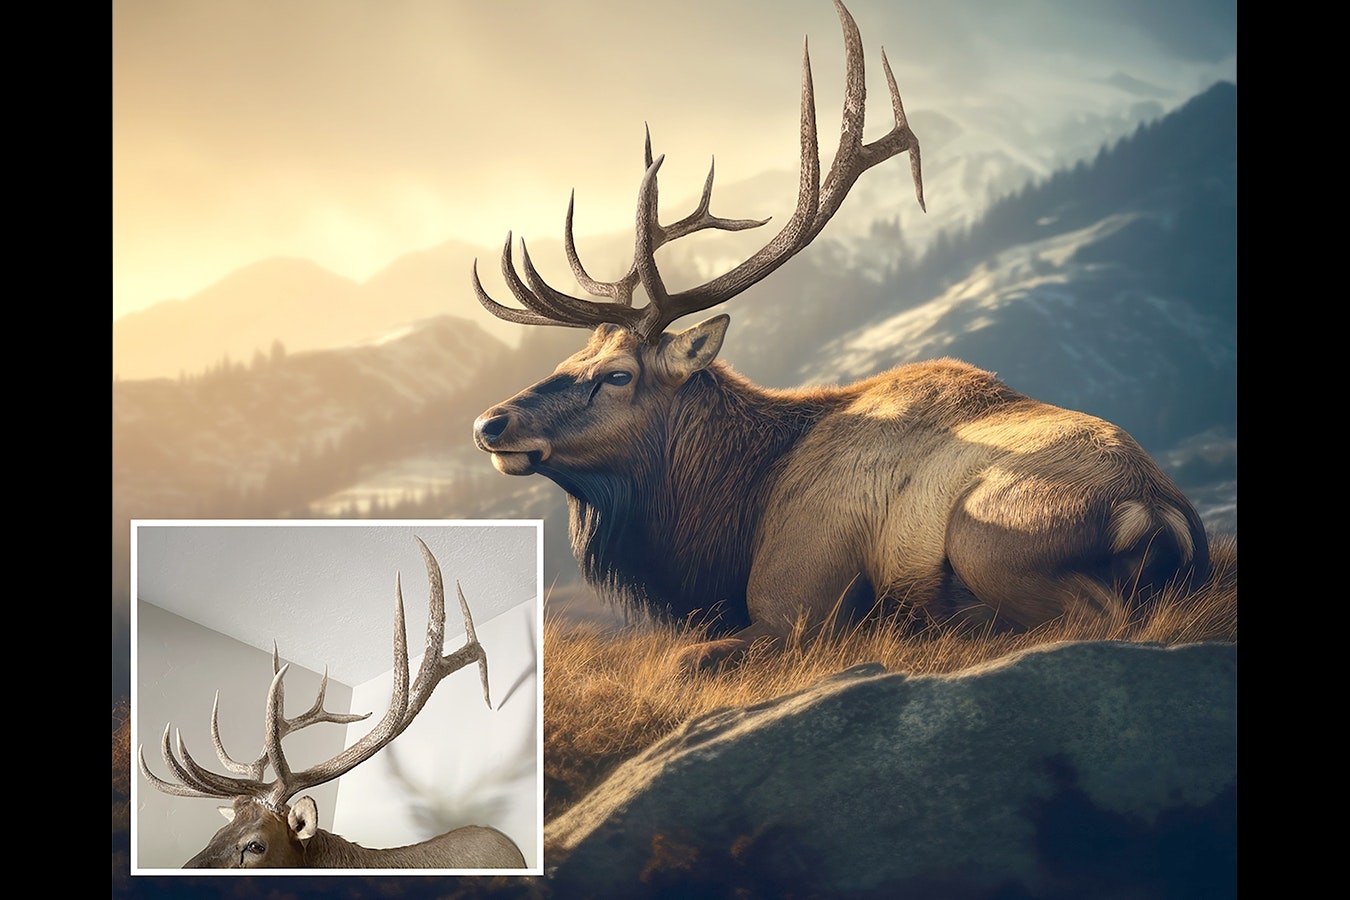 Using photos of hunters’ trophies, a Missouri-based company called Digital Taxidermy can produce life-like images of the animals in natural scenes.